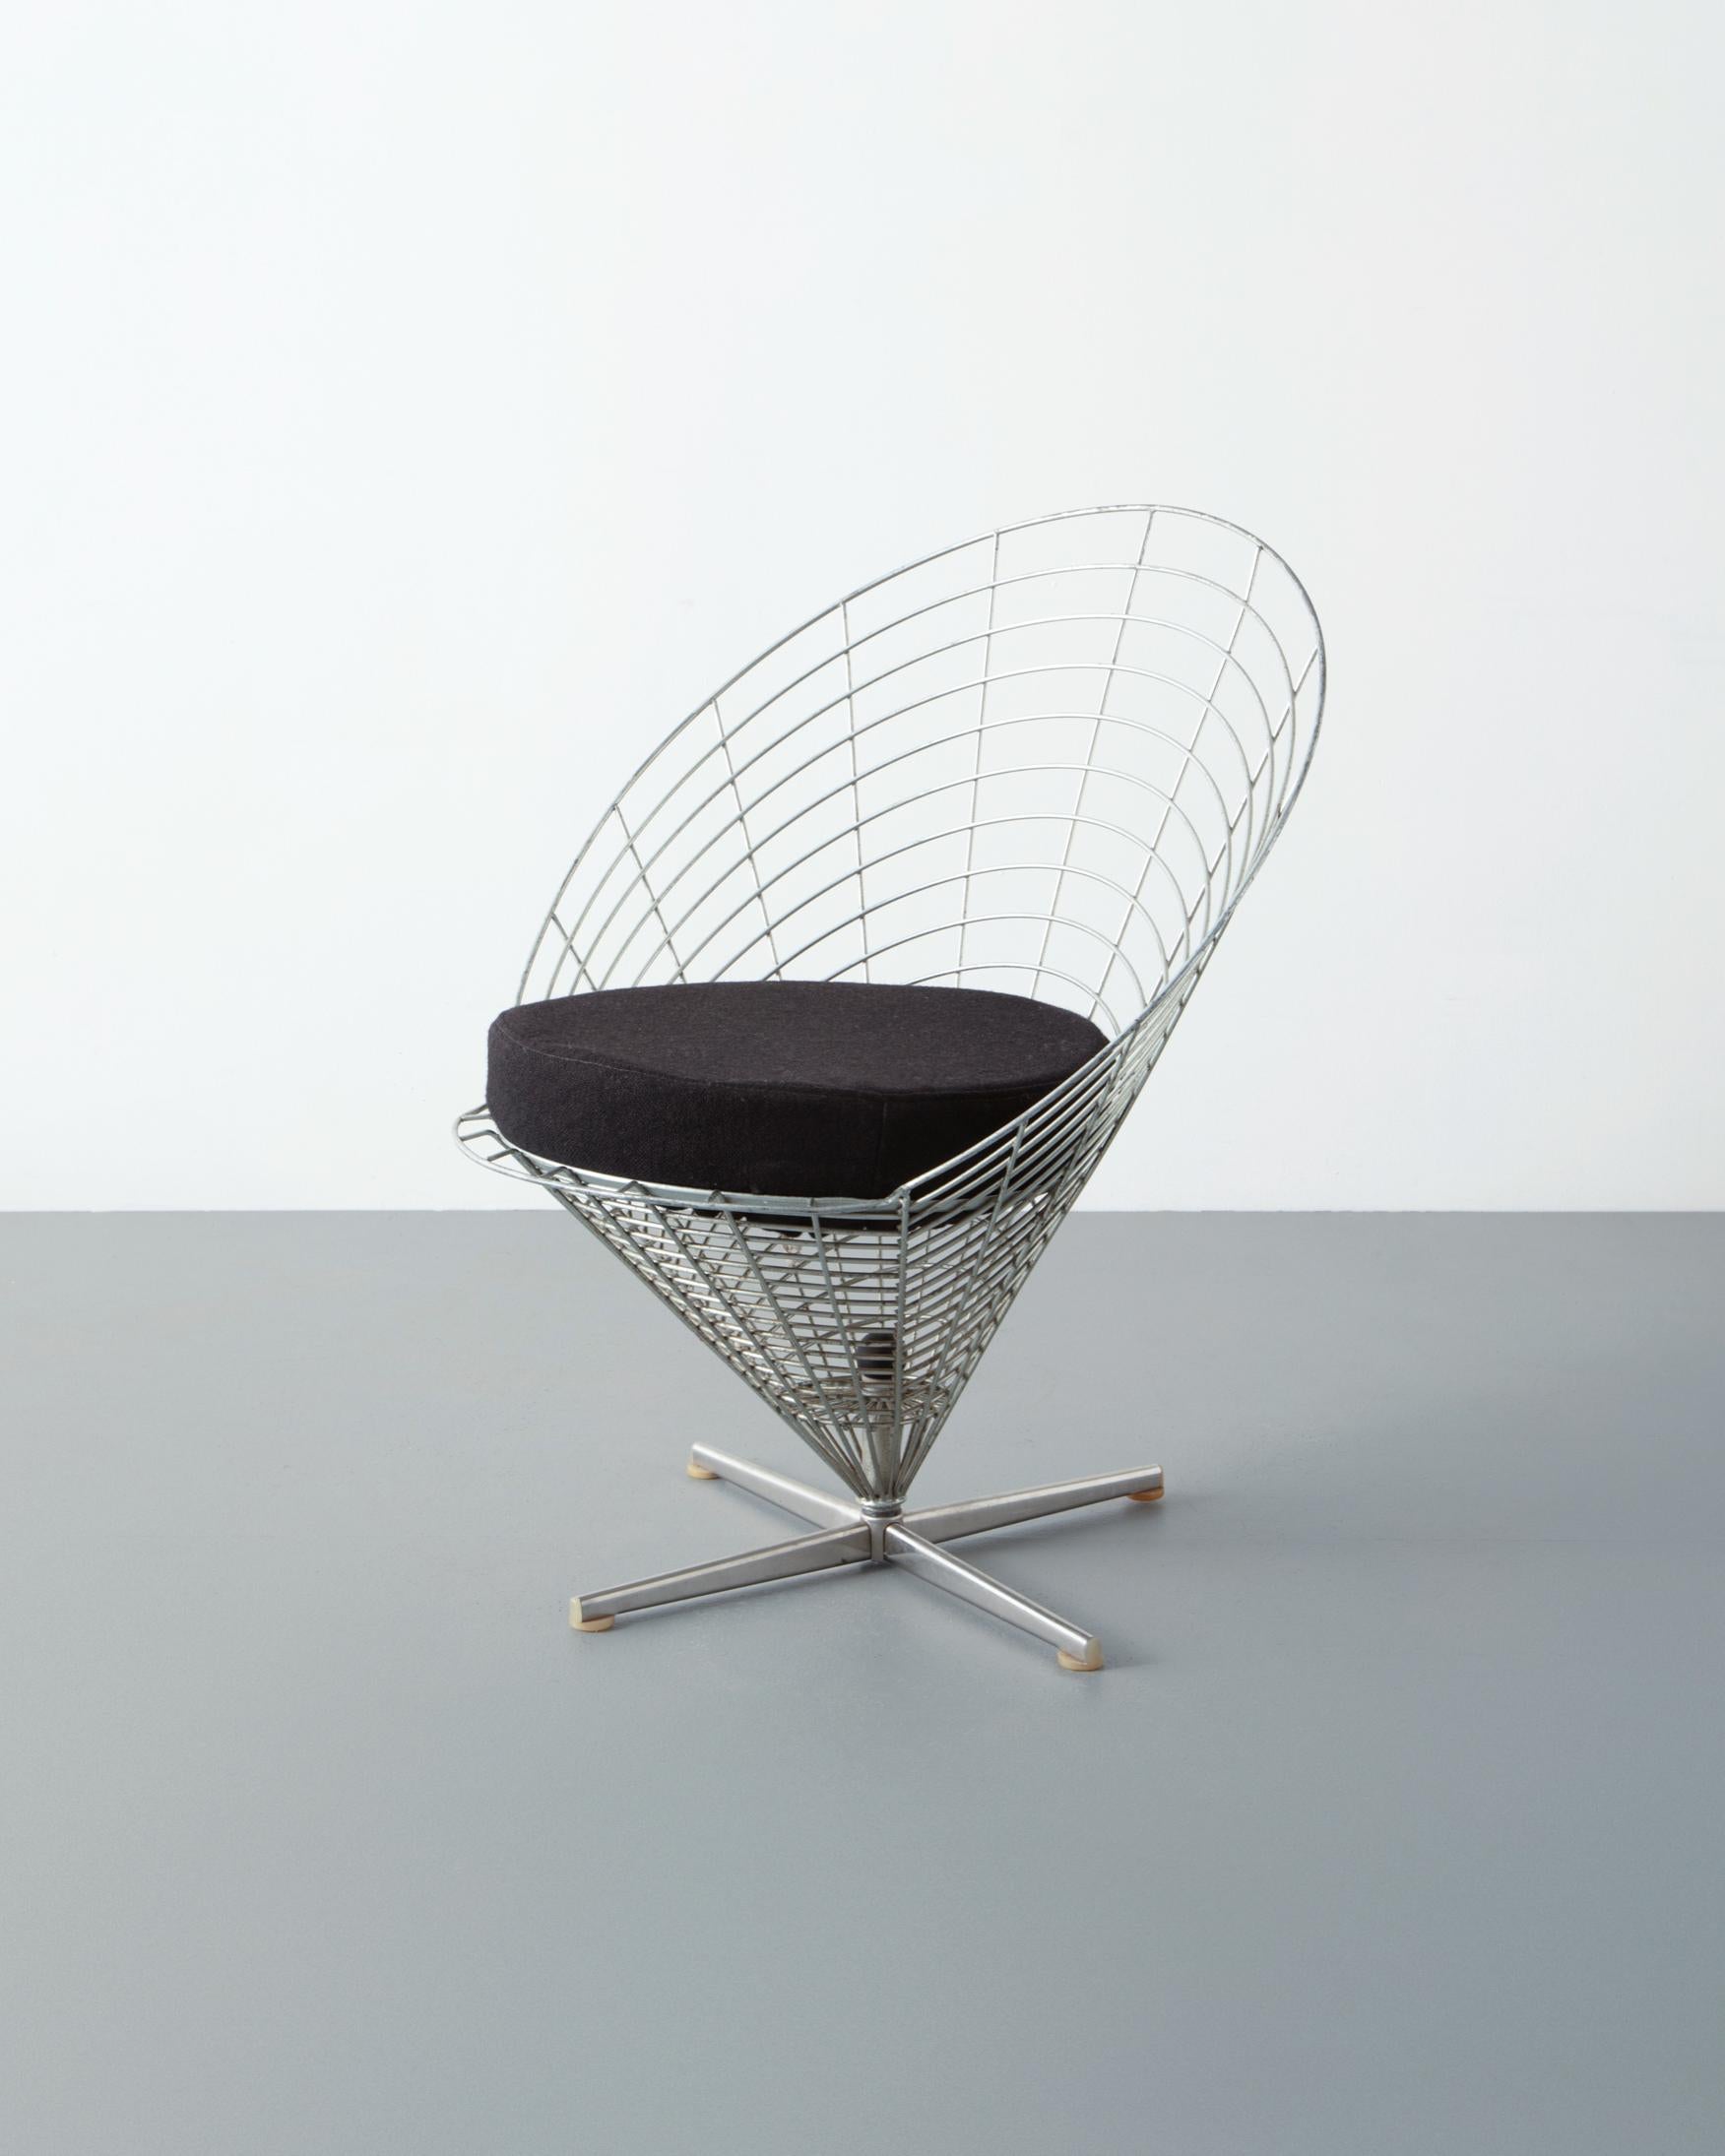 Verner Panton. Wire cone chair, model K2. Designed 1959. An early example manufactured by Plus-linje, Denmark. Galvanized and chrome-plated steel. Cushion: 21